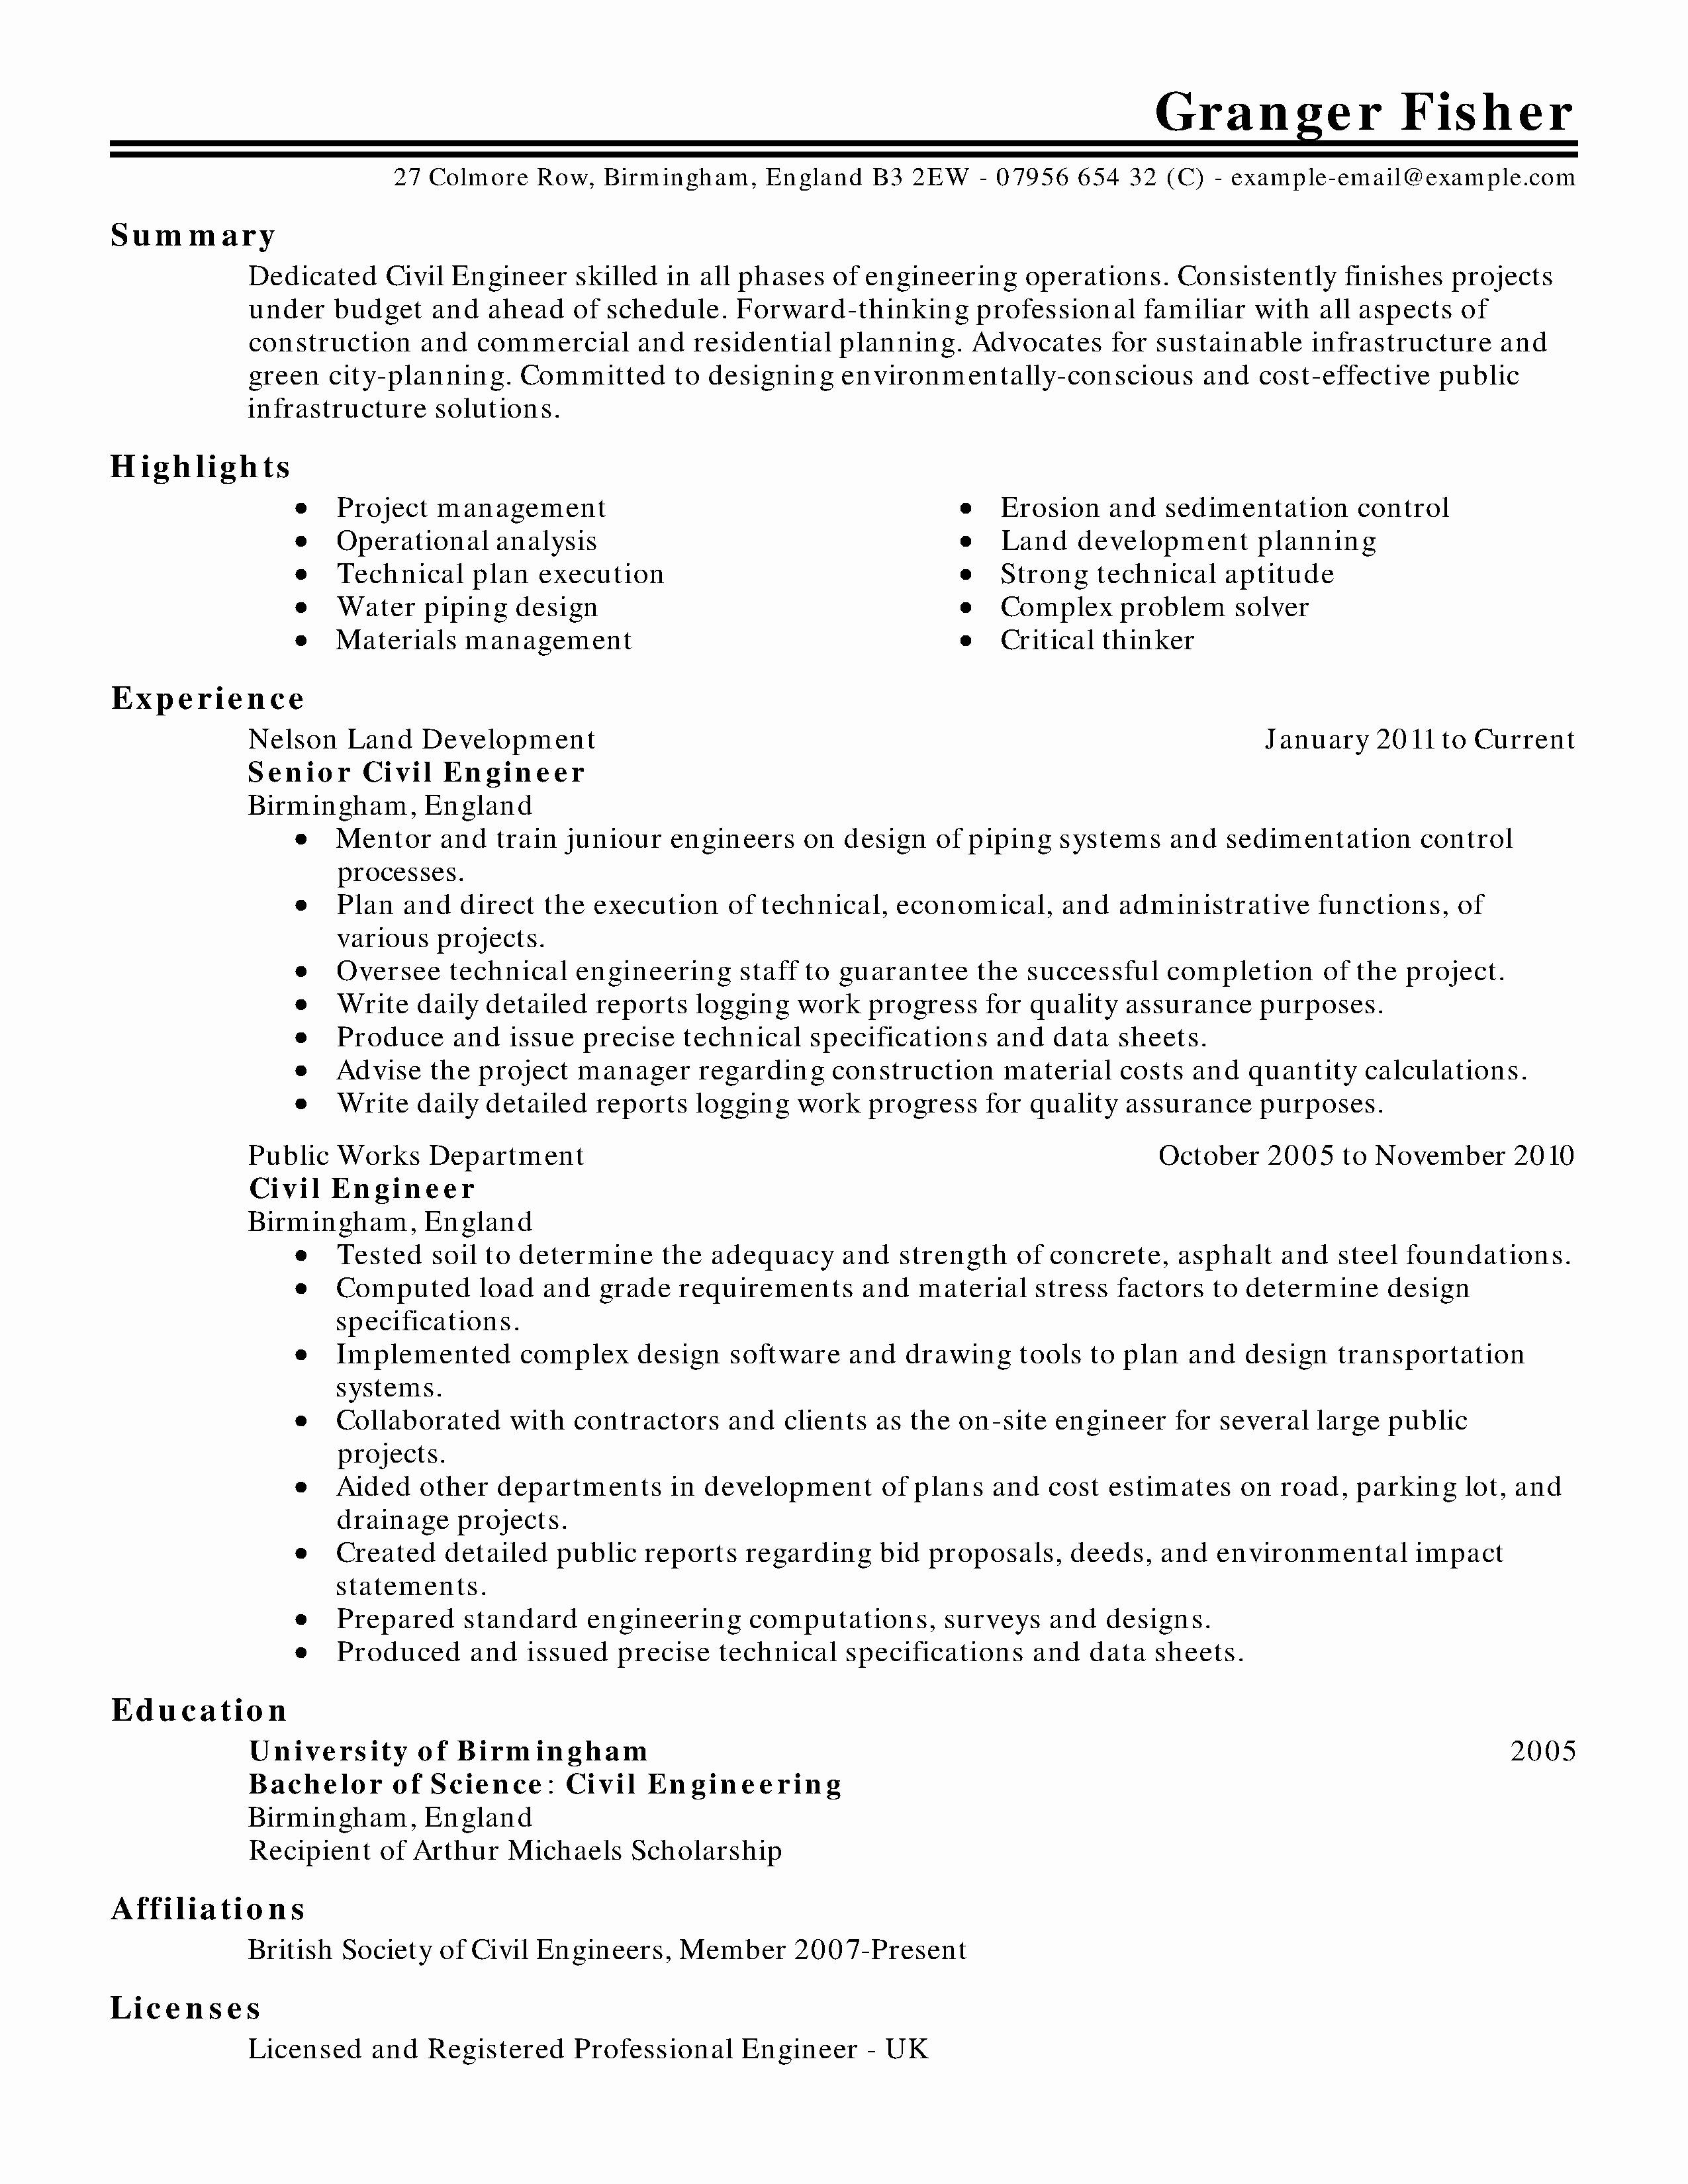 resume template 10 years experience sample resume for 10 years